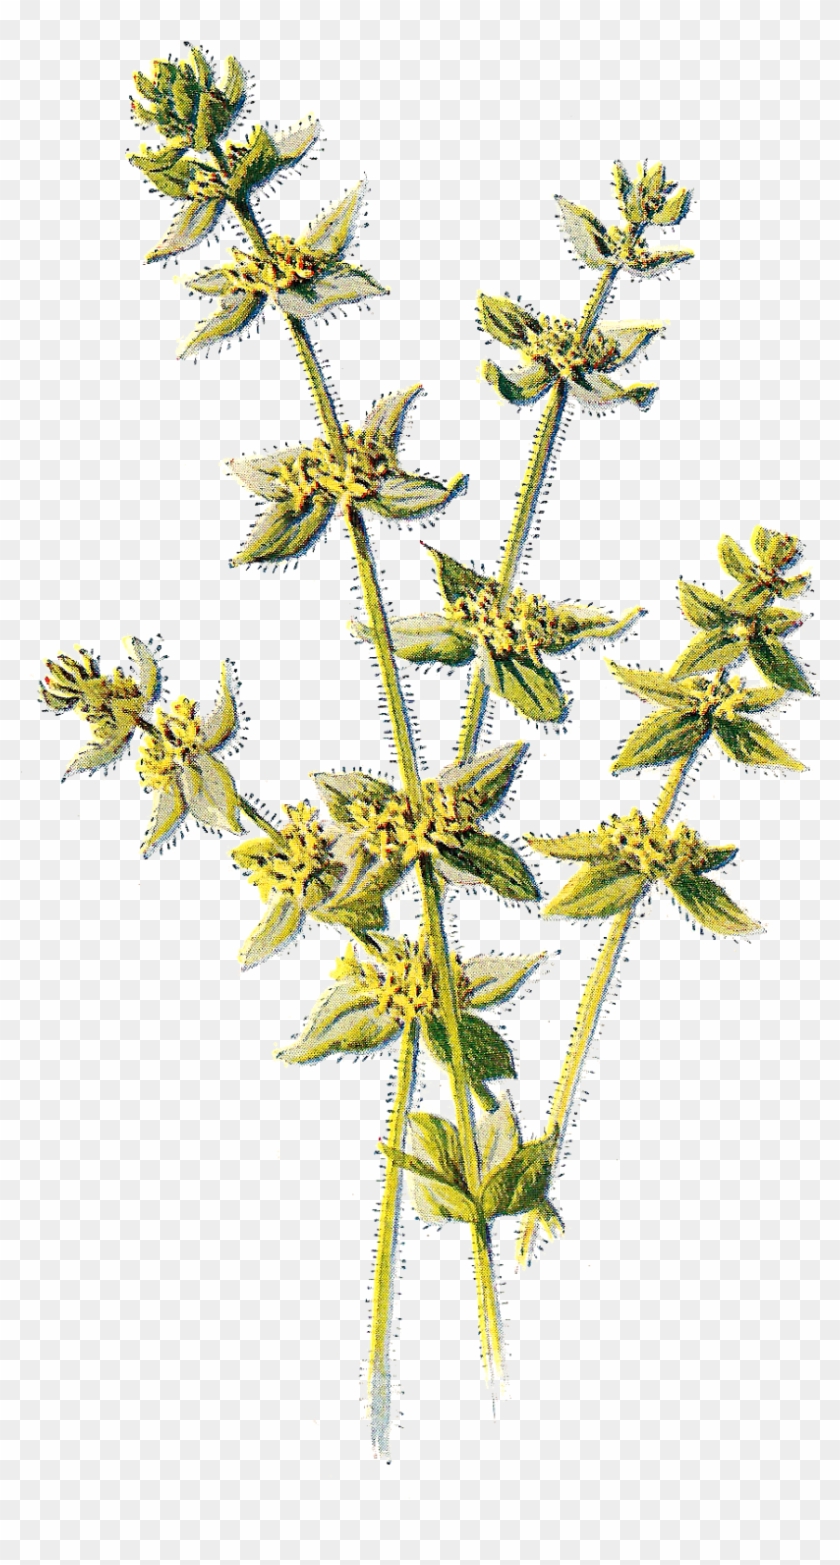 This Is A Beautiful Digital Graphic Of The Wildflower, - Clip Art #290188